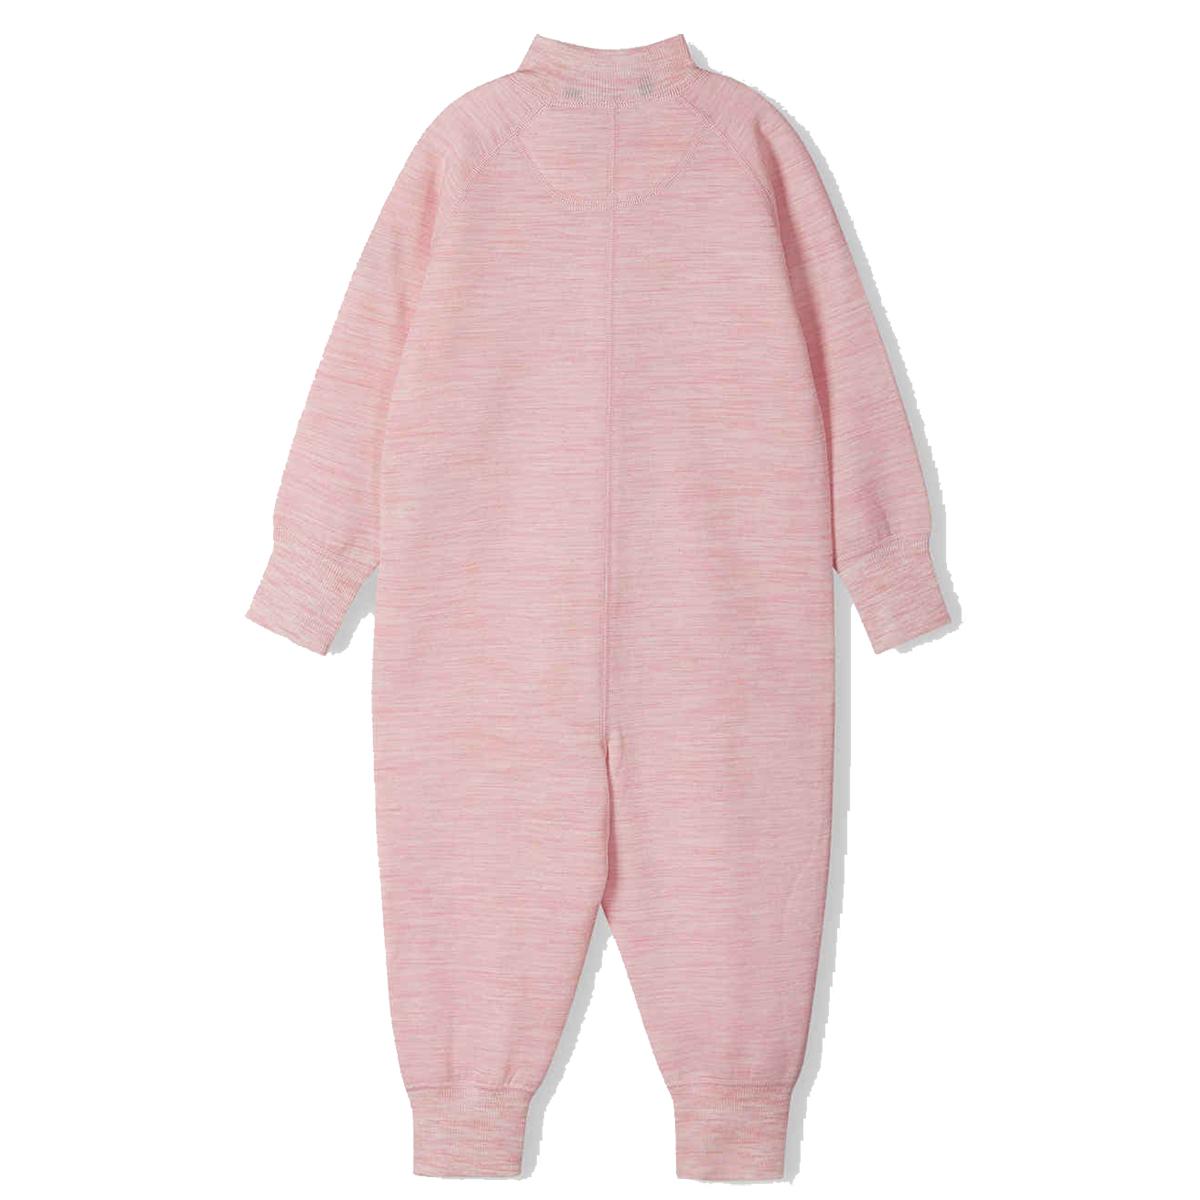 Reima Parvin Overalls - Toddlers'